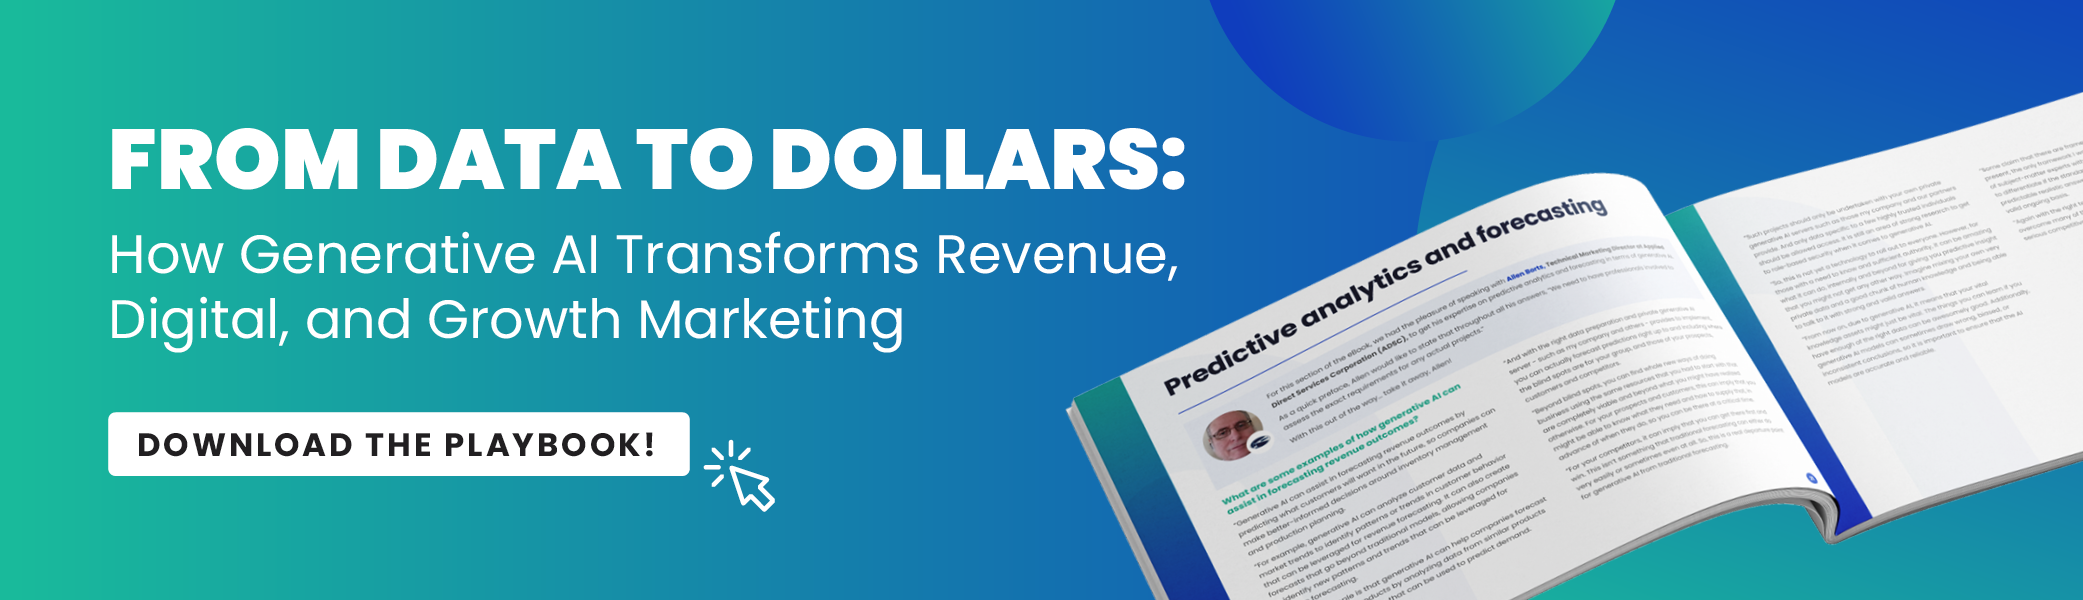 From Data to Dollars: How Generative AI Transforms Revenue, Digital, and Growth Marketing [eBook]